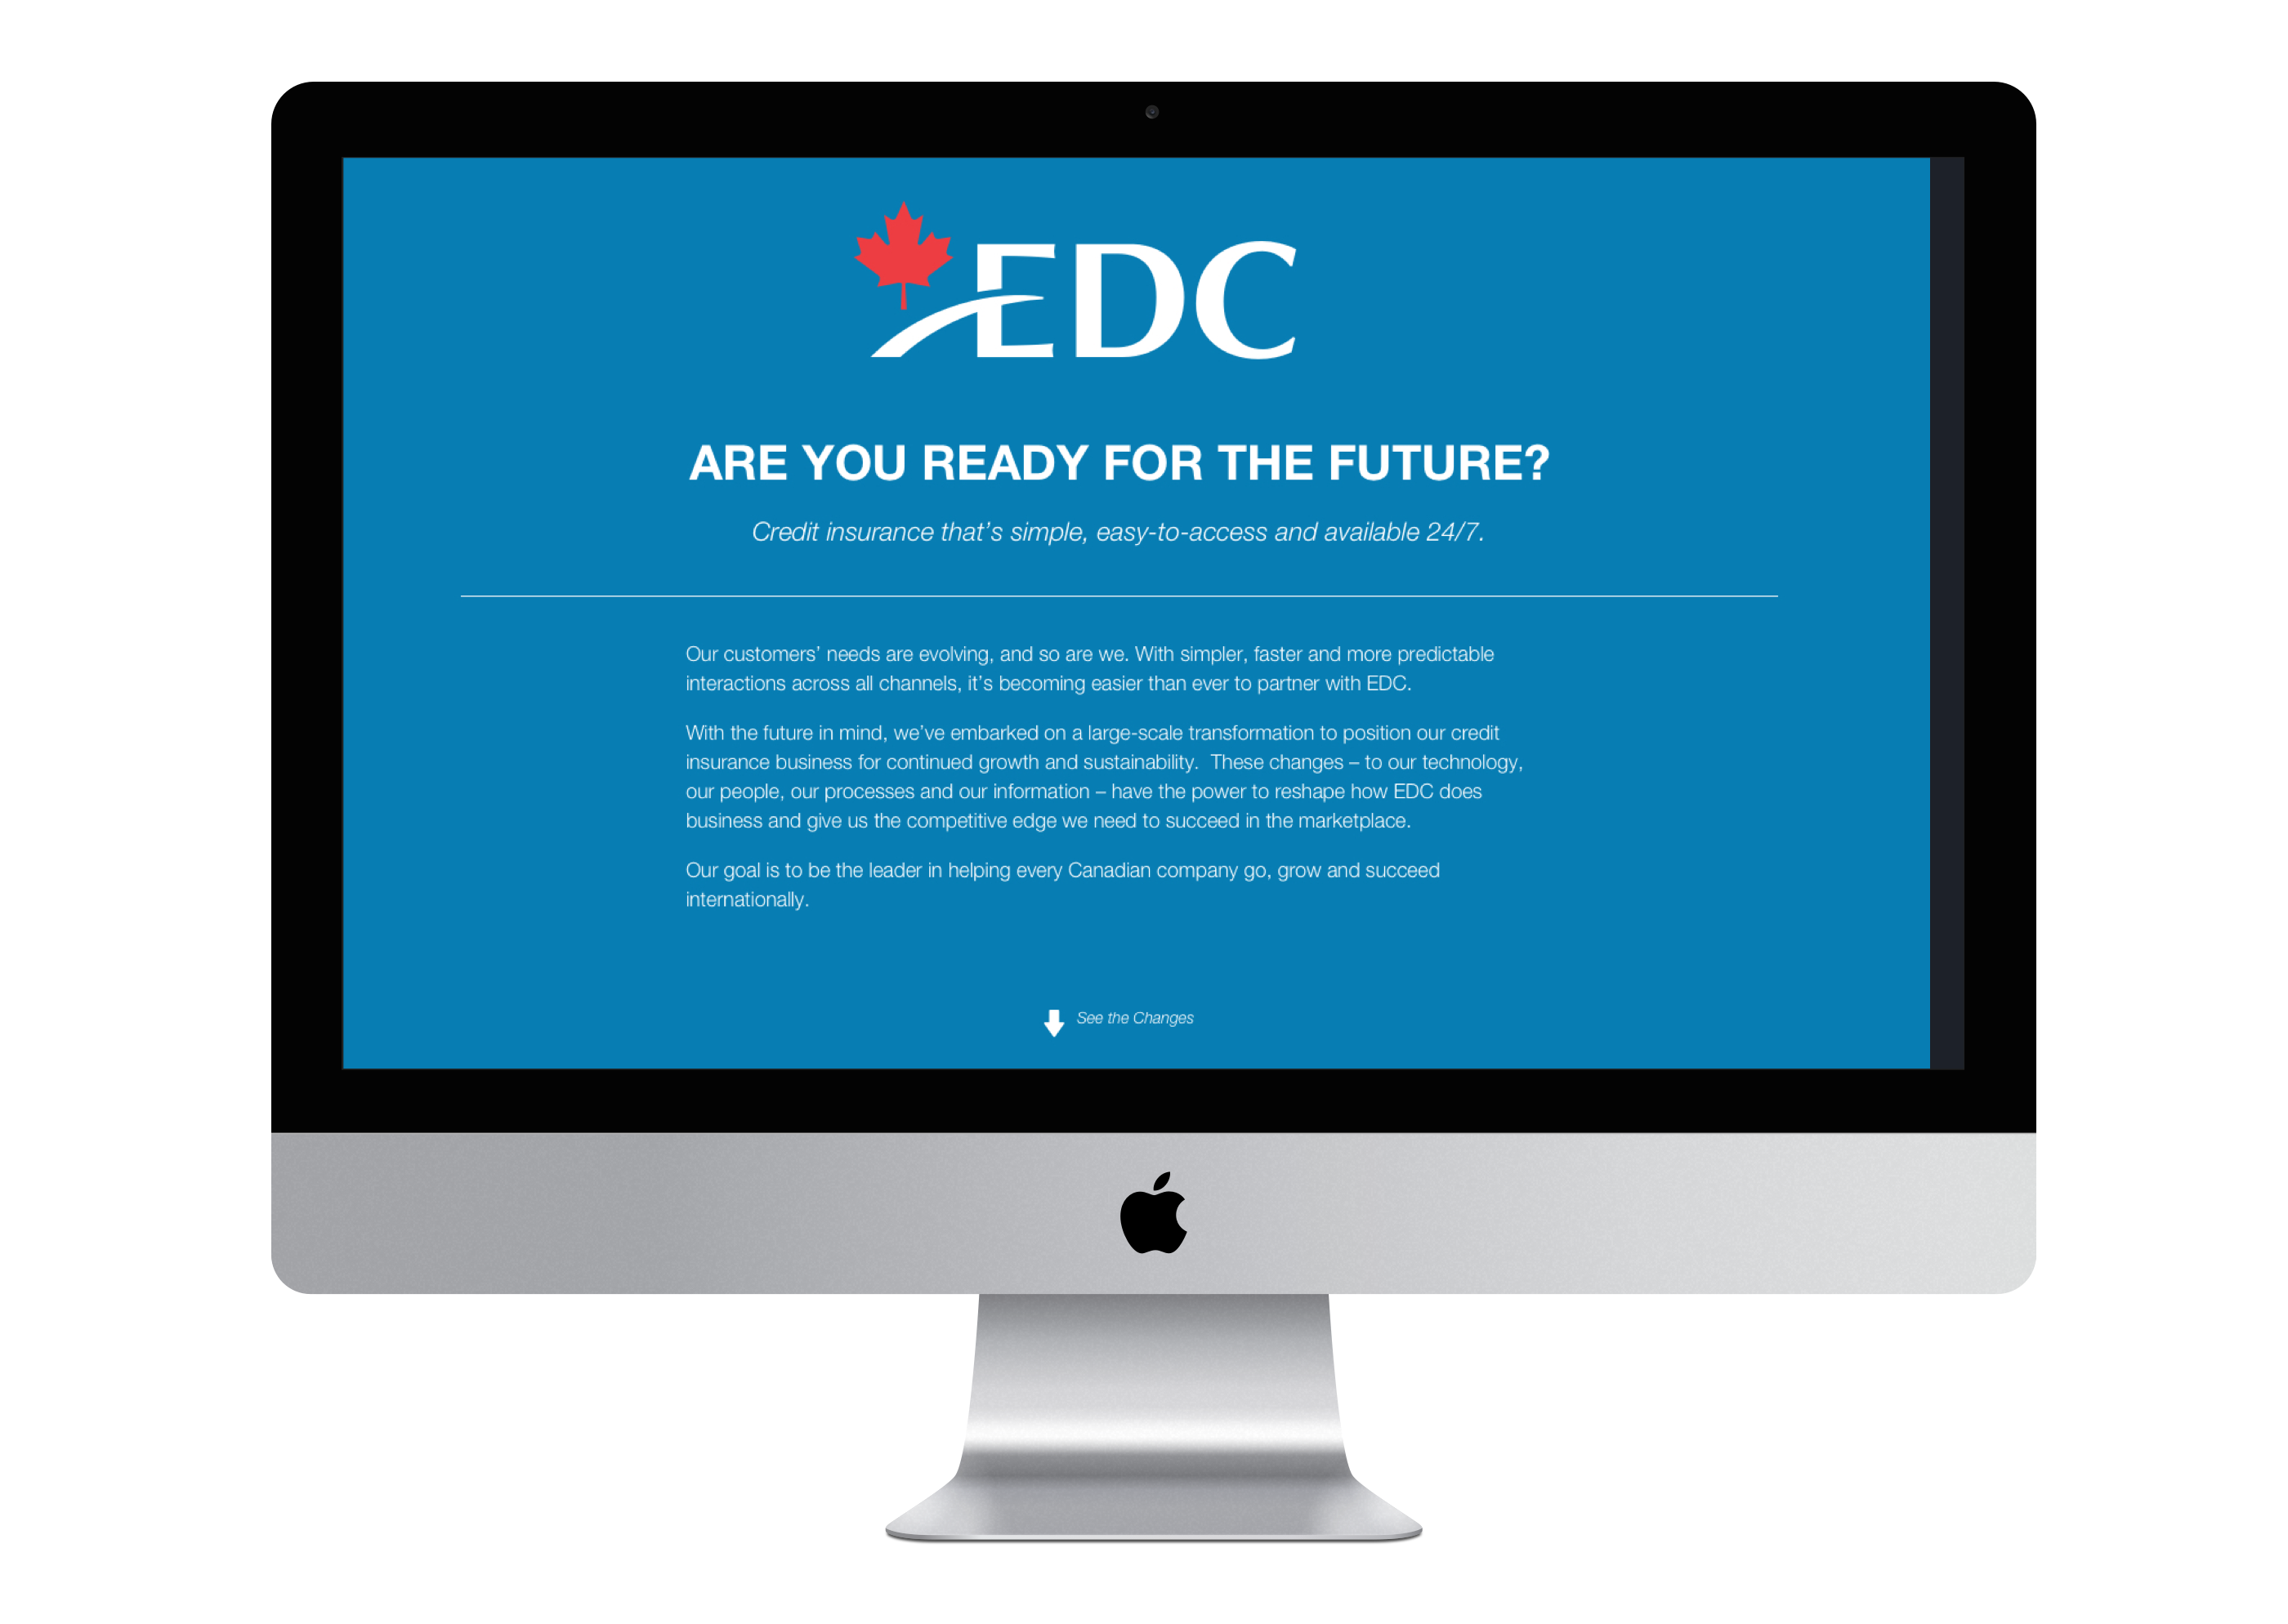 iMac with the top of EDC internal landing web page